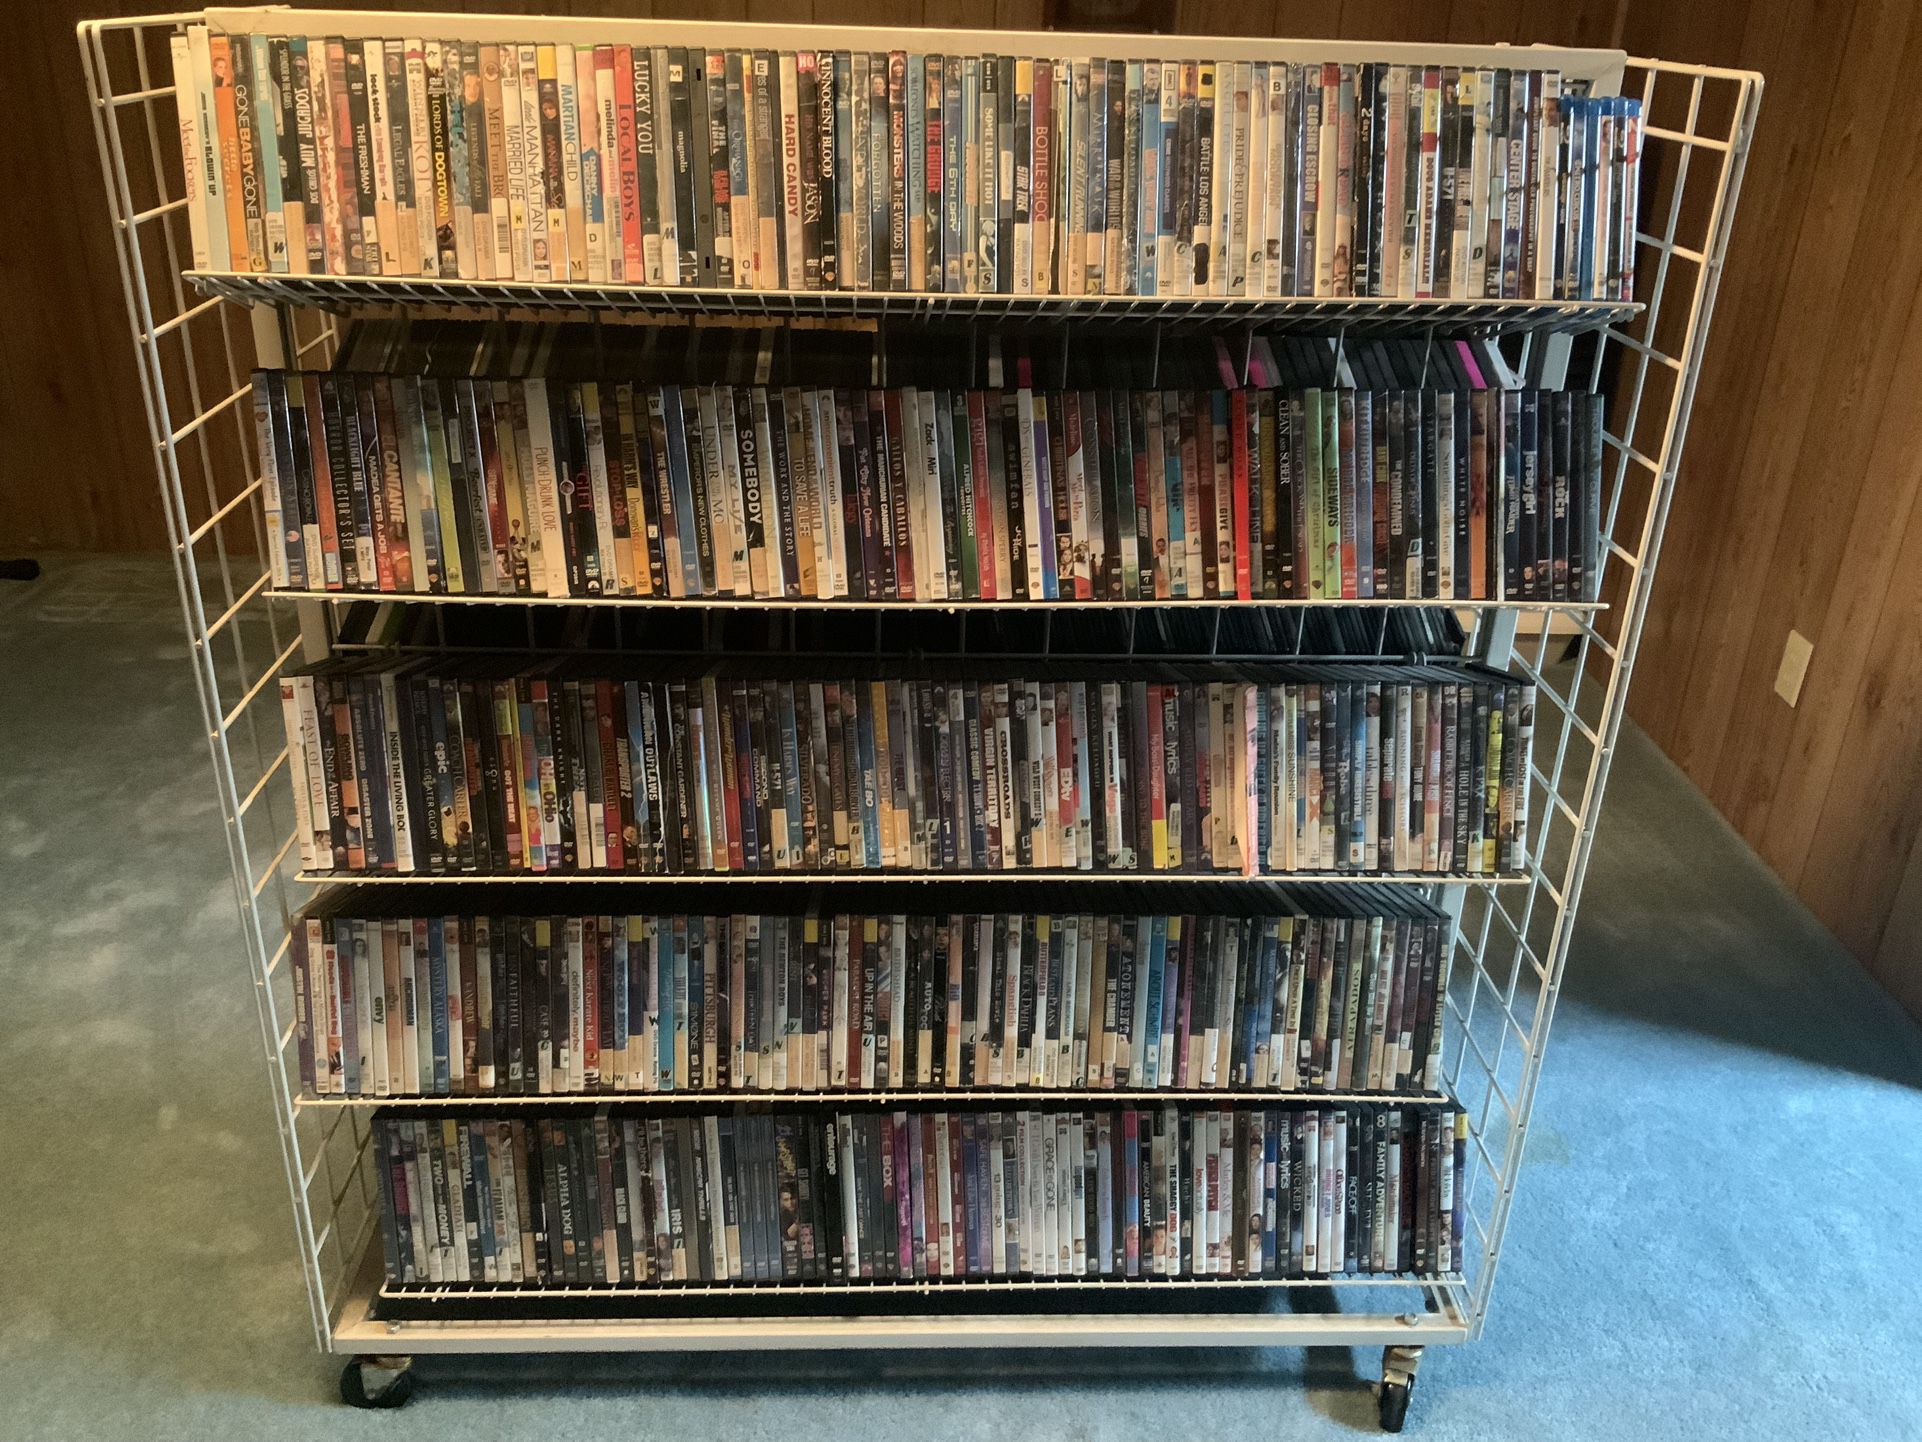 Rolling DVD/bluray/cd/book Rack Will Hold Around 1000 DVDs. 827 Dvds, 16 CDs, 2 PS3, 3 PlayStation 2, 2 Xbox 360 And 6 Blu-ray’s Included. $90 For All